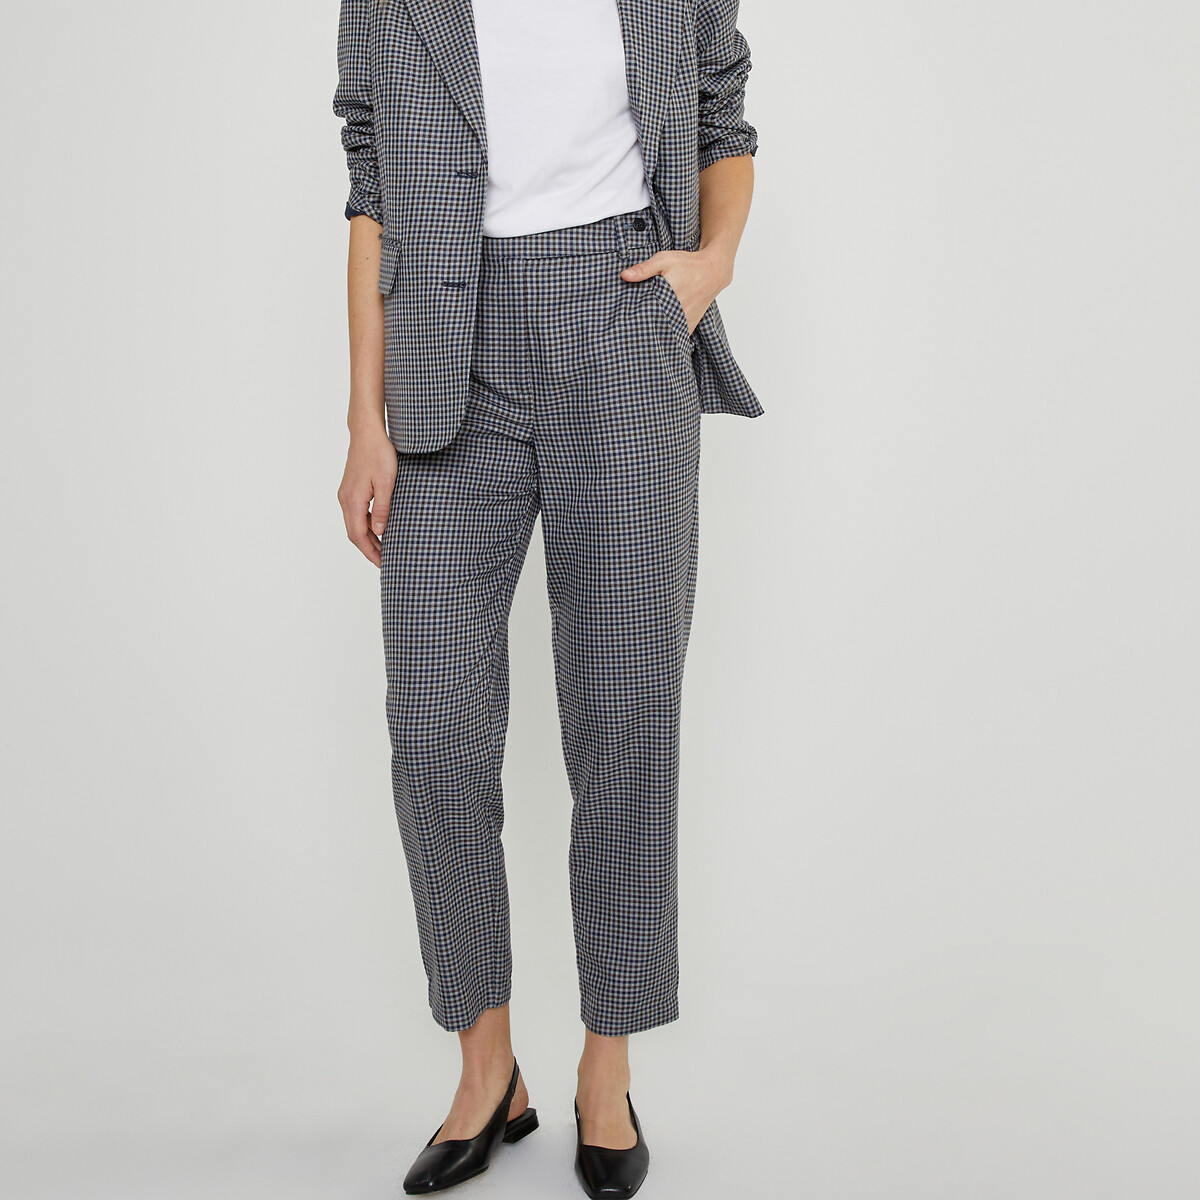 Checked Cigarette Trousers, Length 28.5"